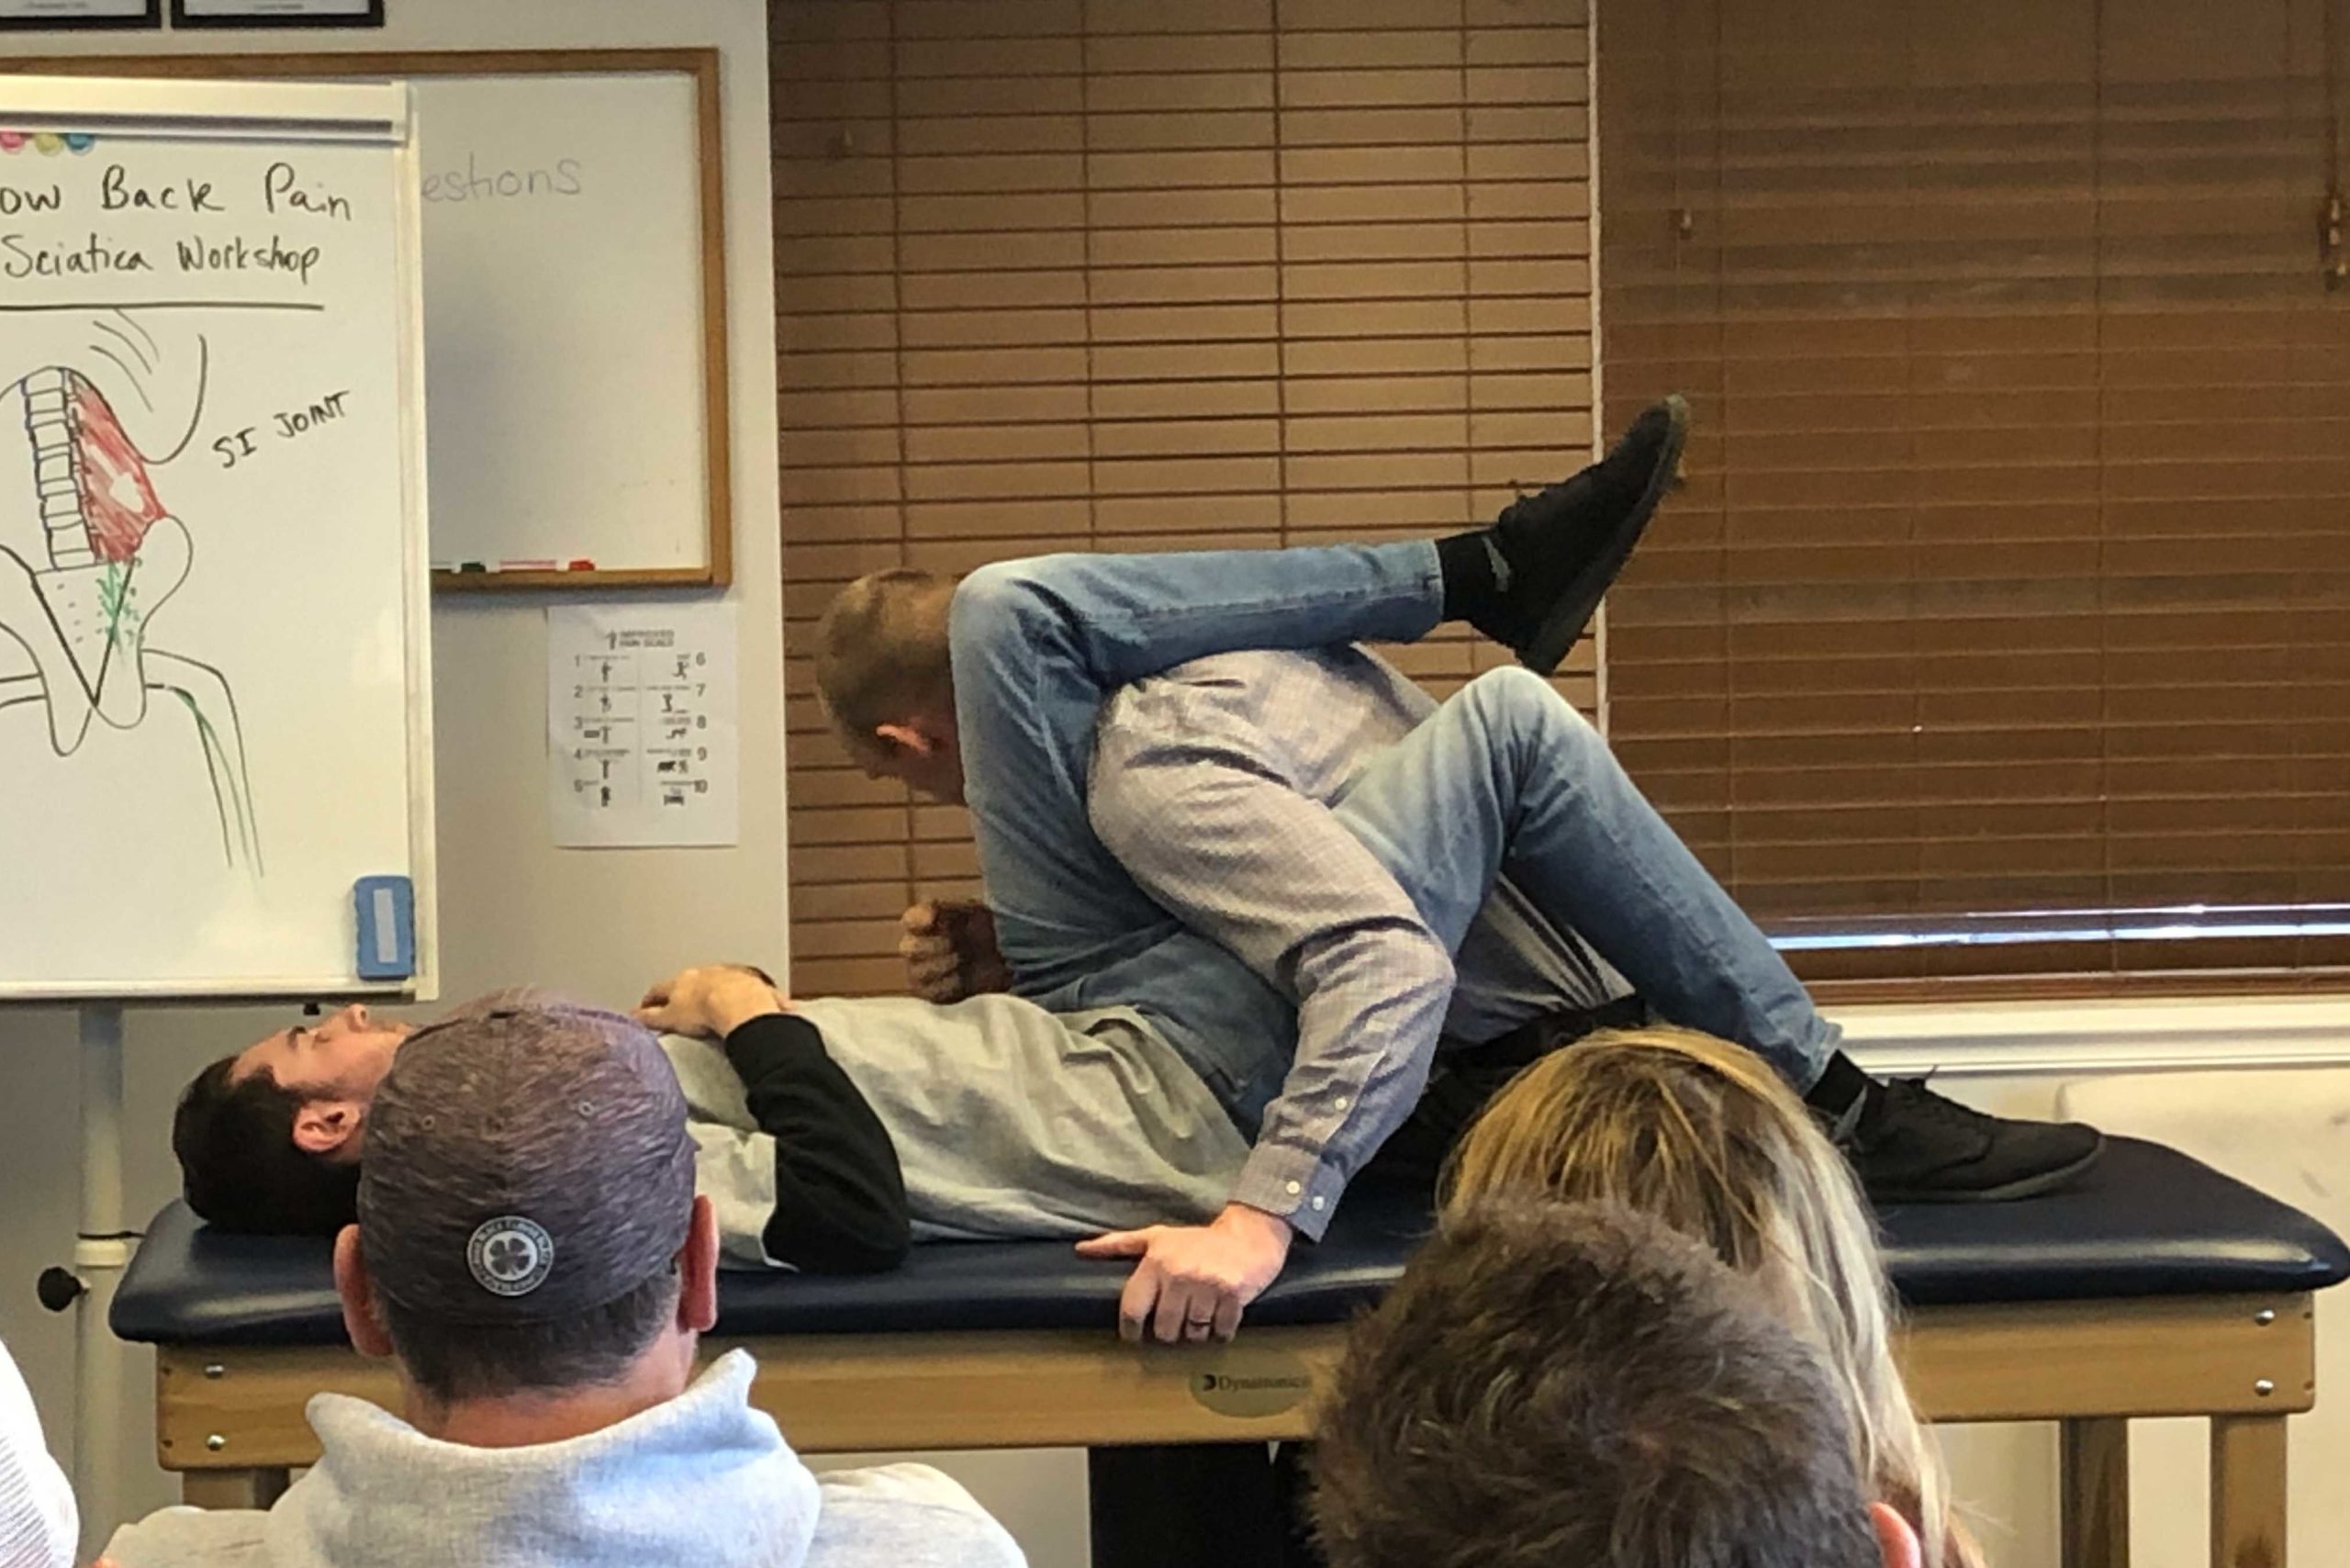 Scott Christensen healing knee pain with physical therapy